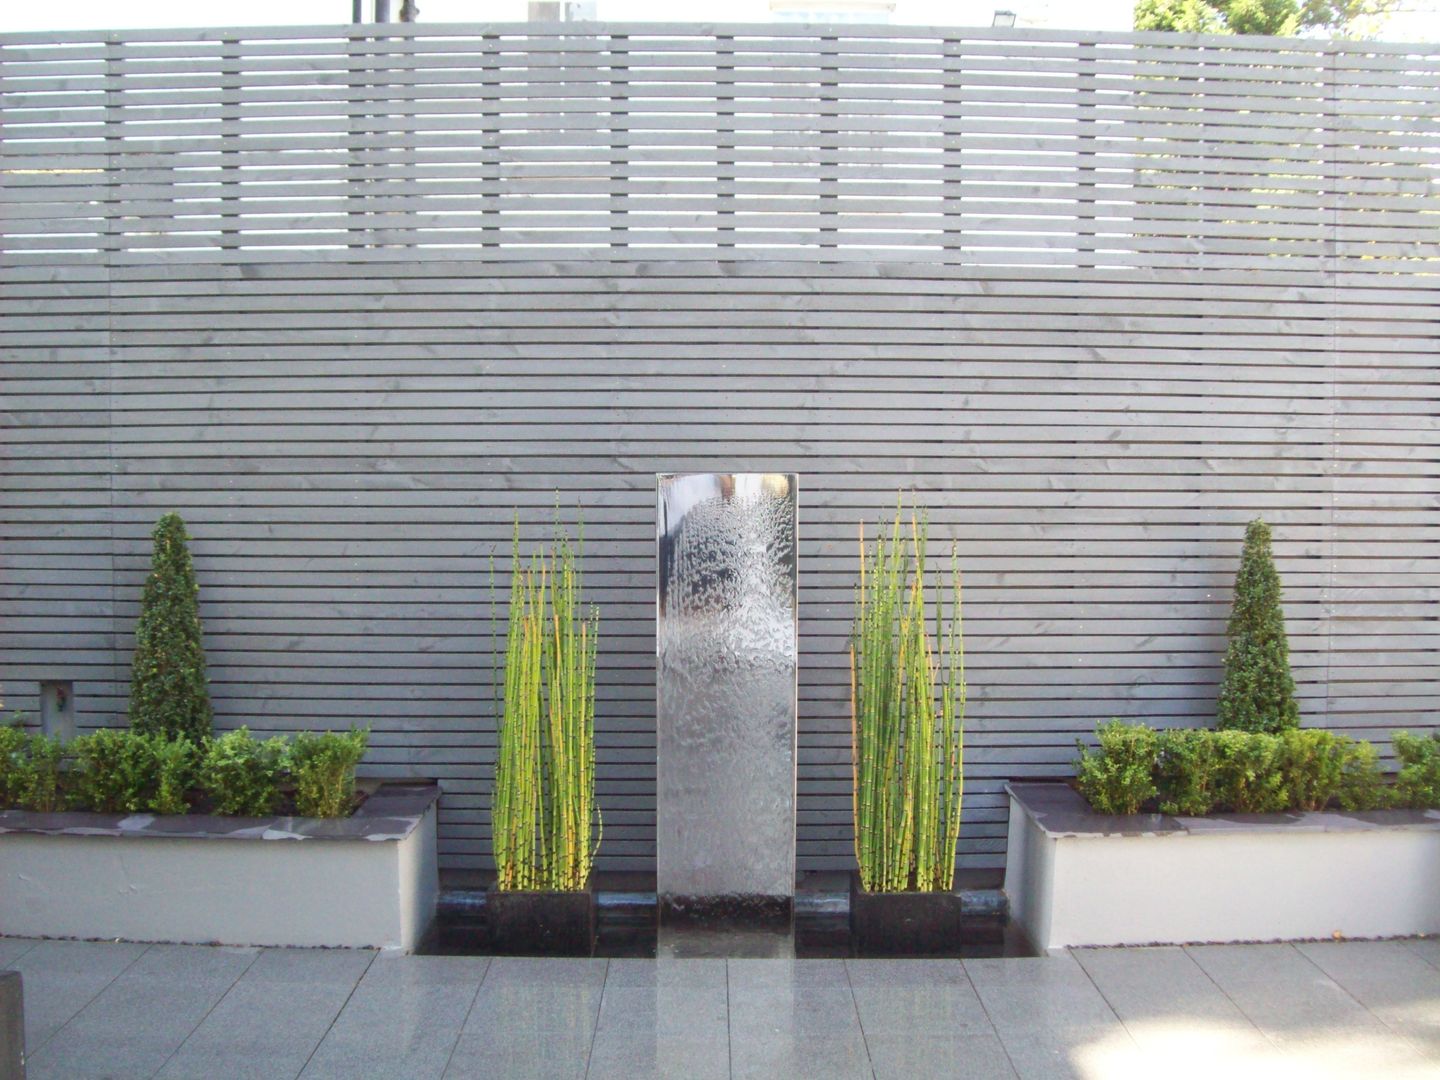 Stainless Steel Metal Water Feature Unique Landscapes Taman Modern